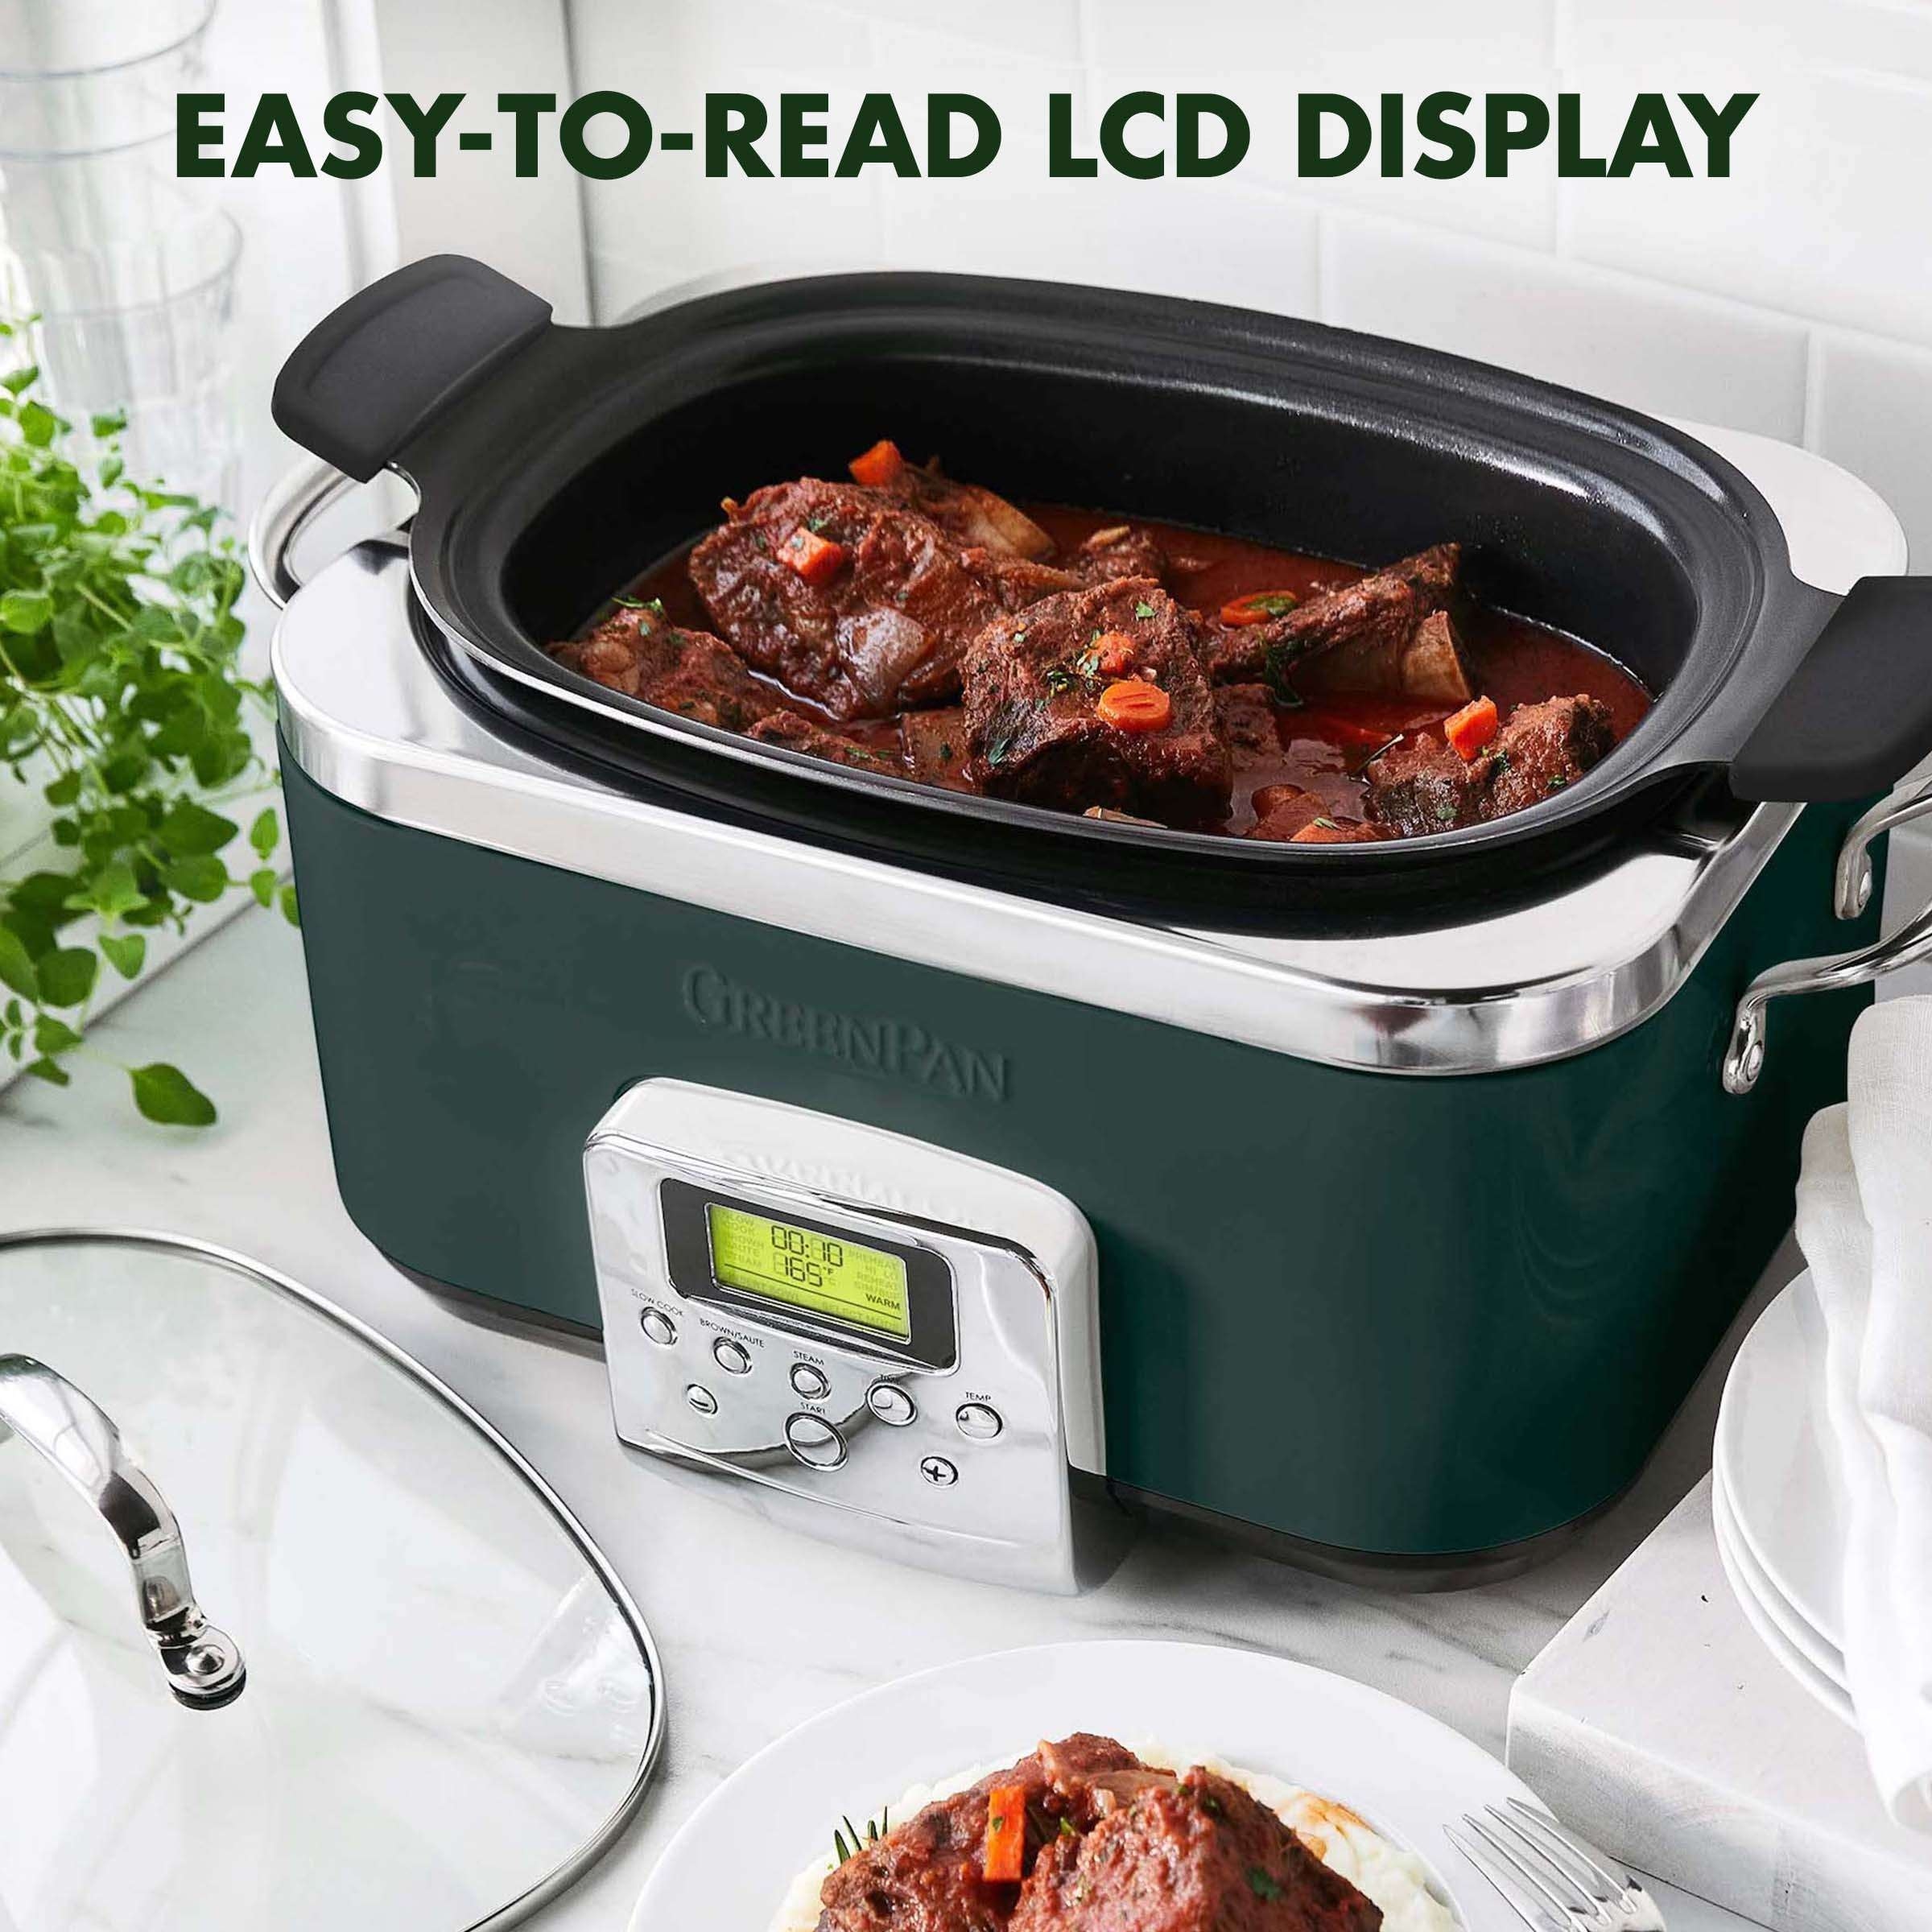 GreenLife Healthy Cook Duo Electric Slow Cooker Electric